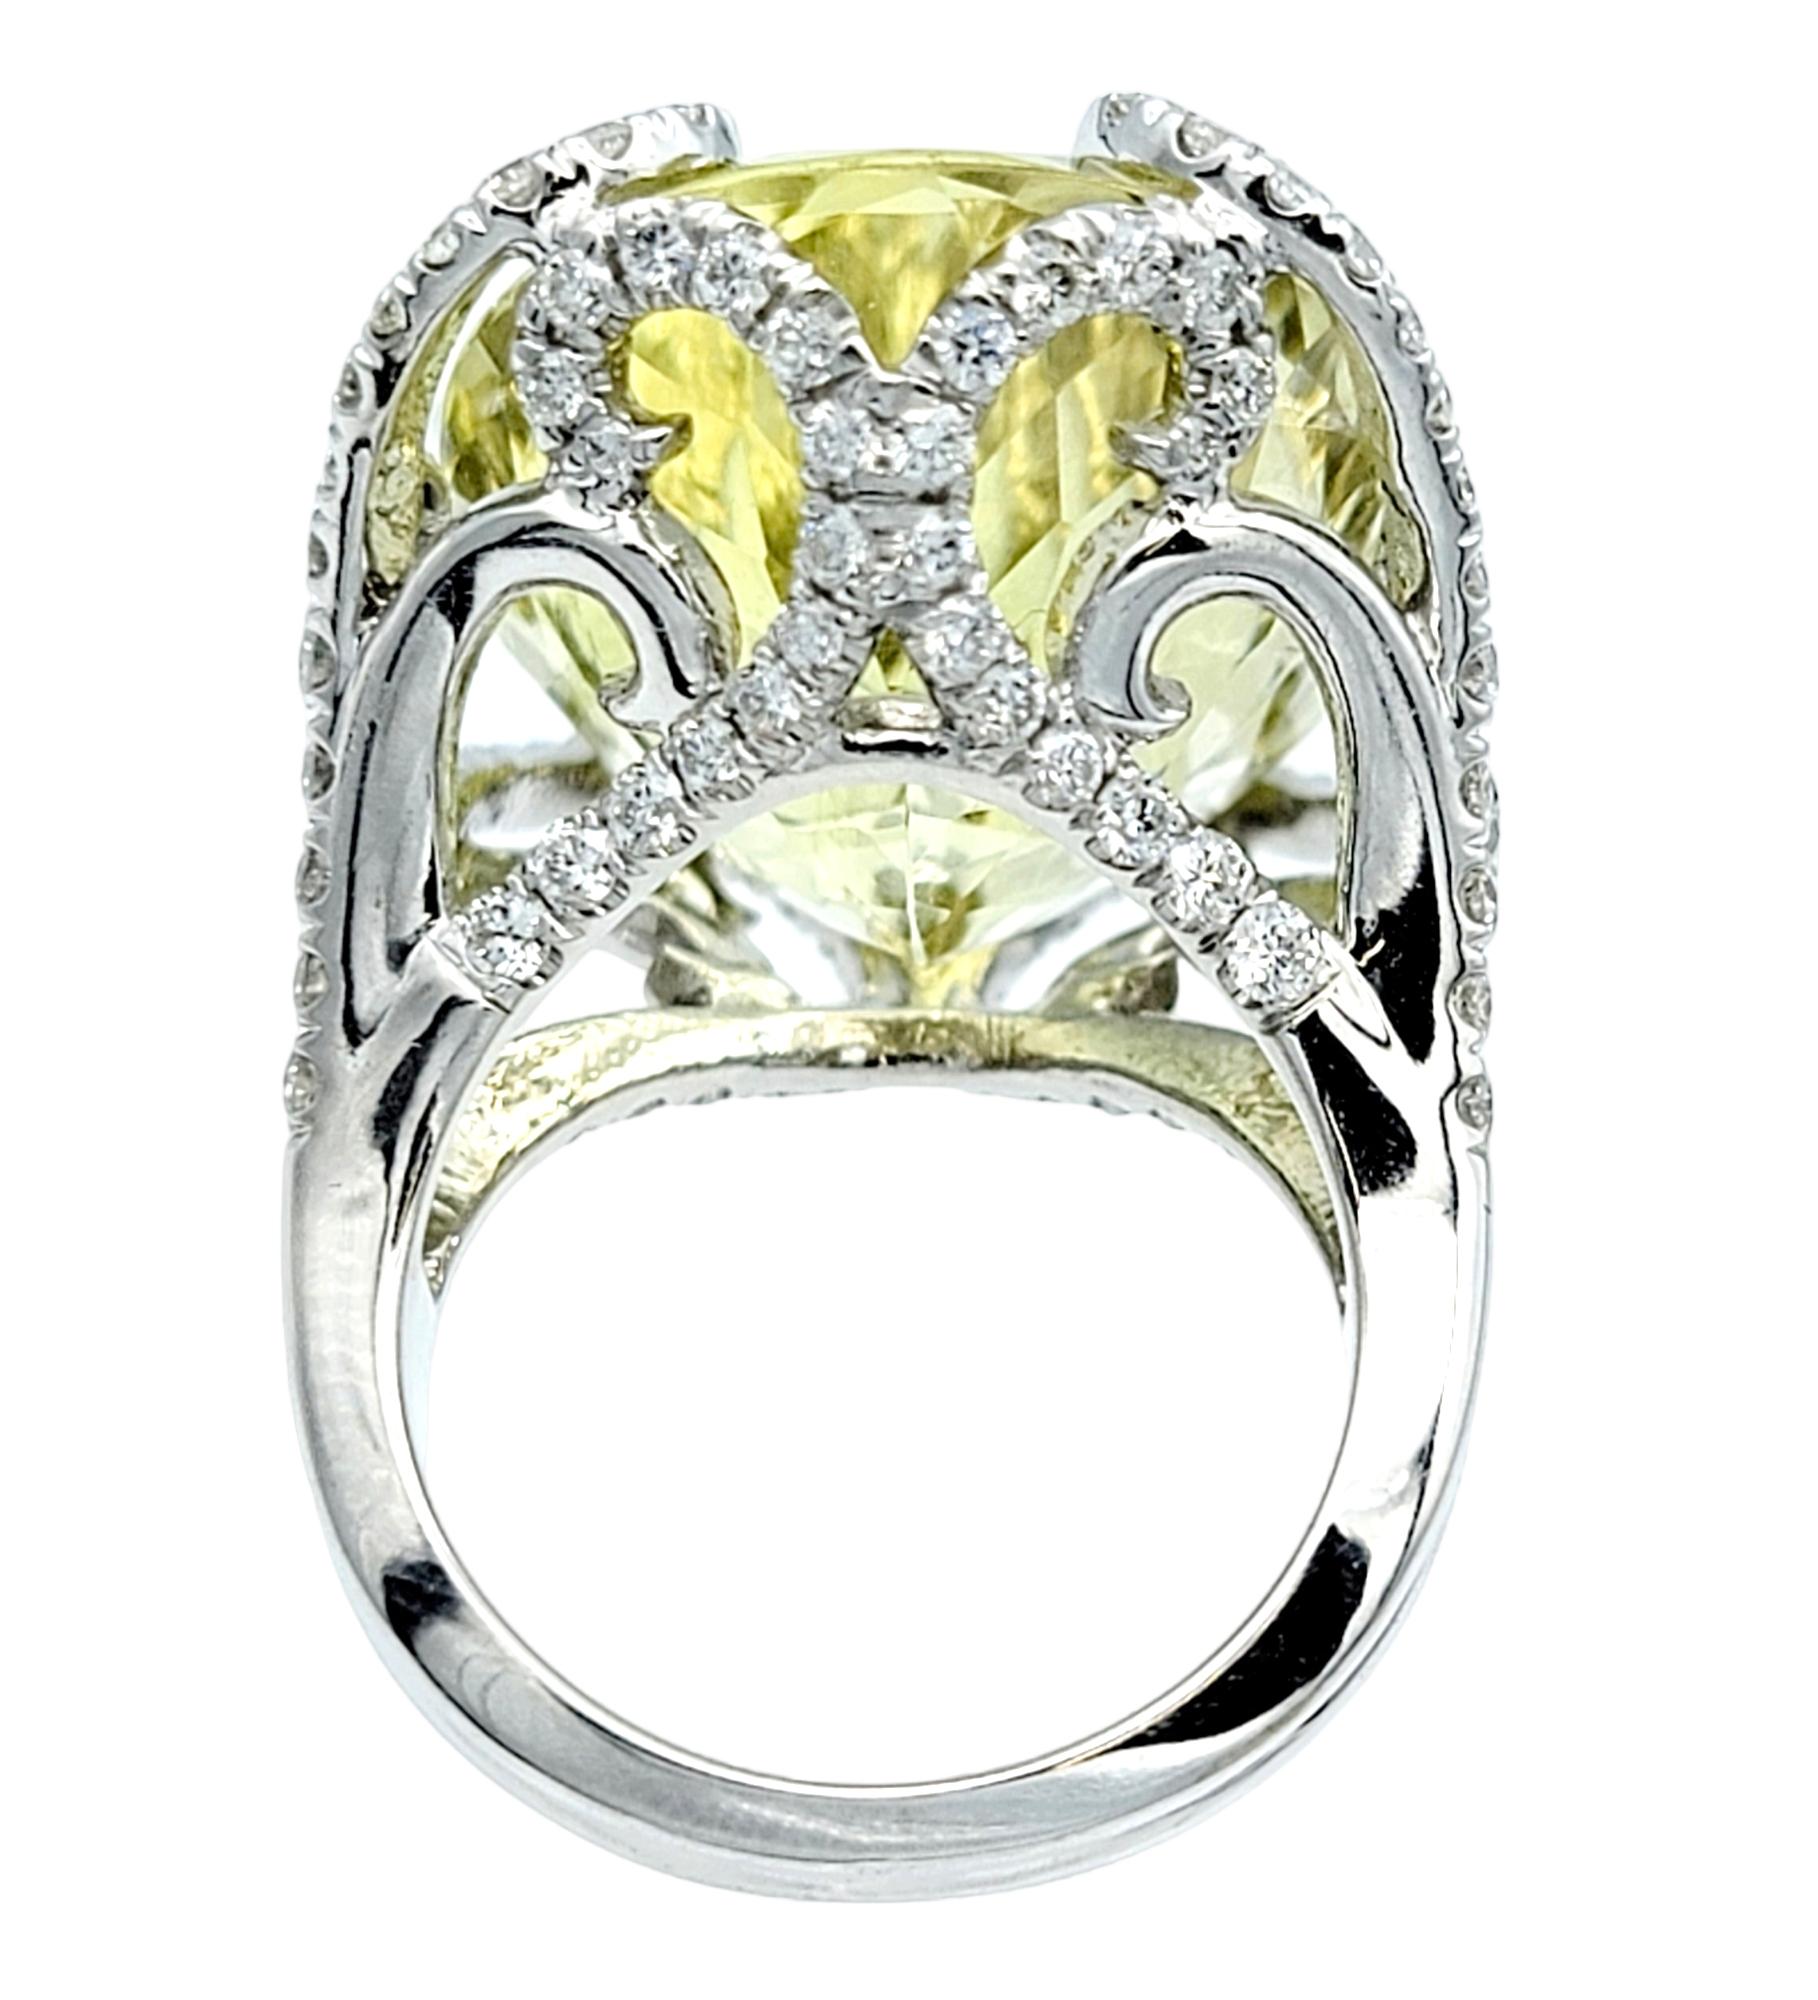 Huge 31.0 Carat Oval Cut Prasiolite Cocktail Ring with Diamond Accents 14K Gold For Sale 1